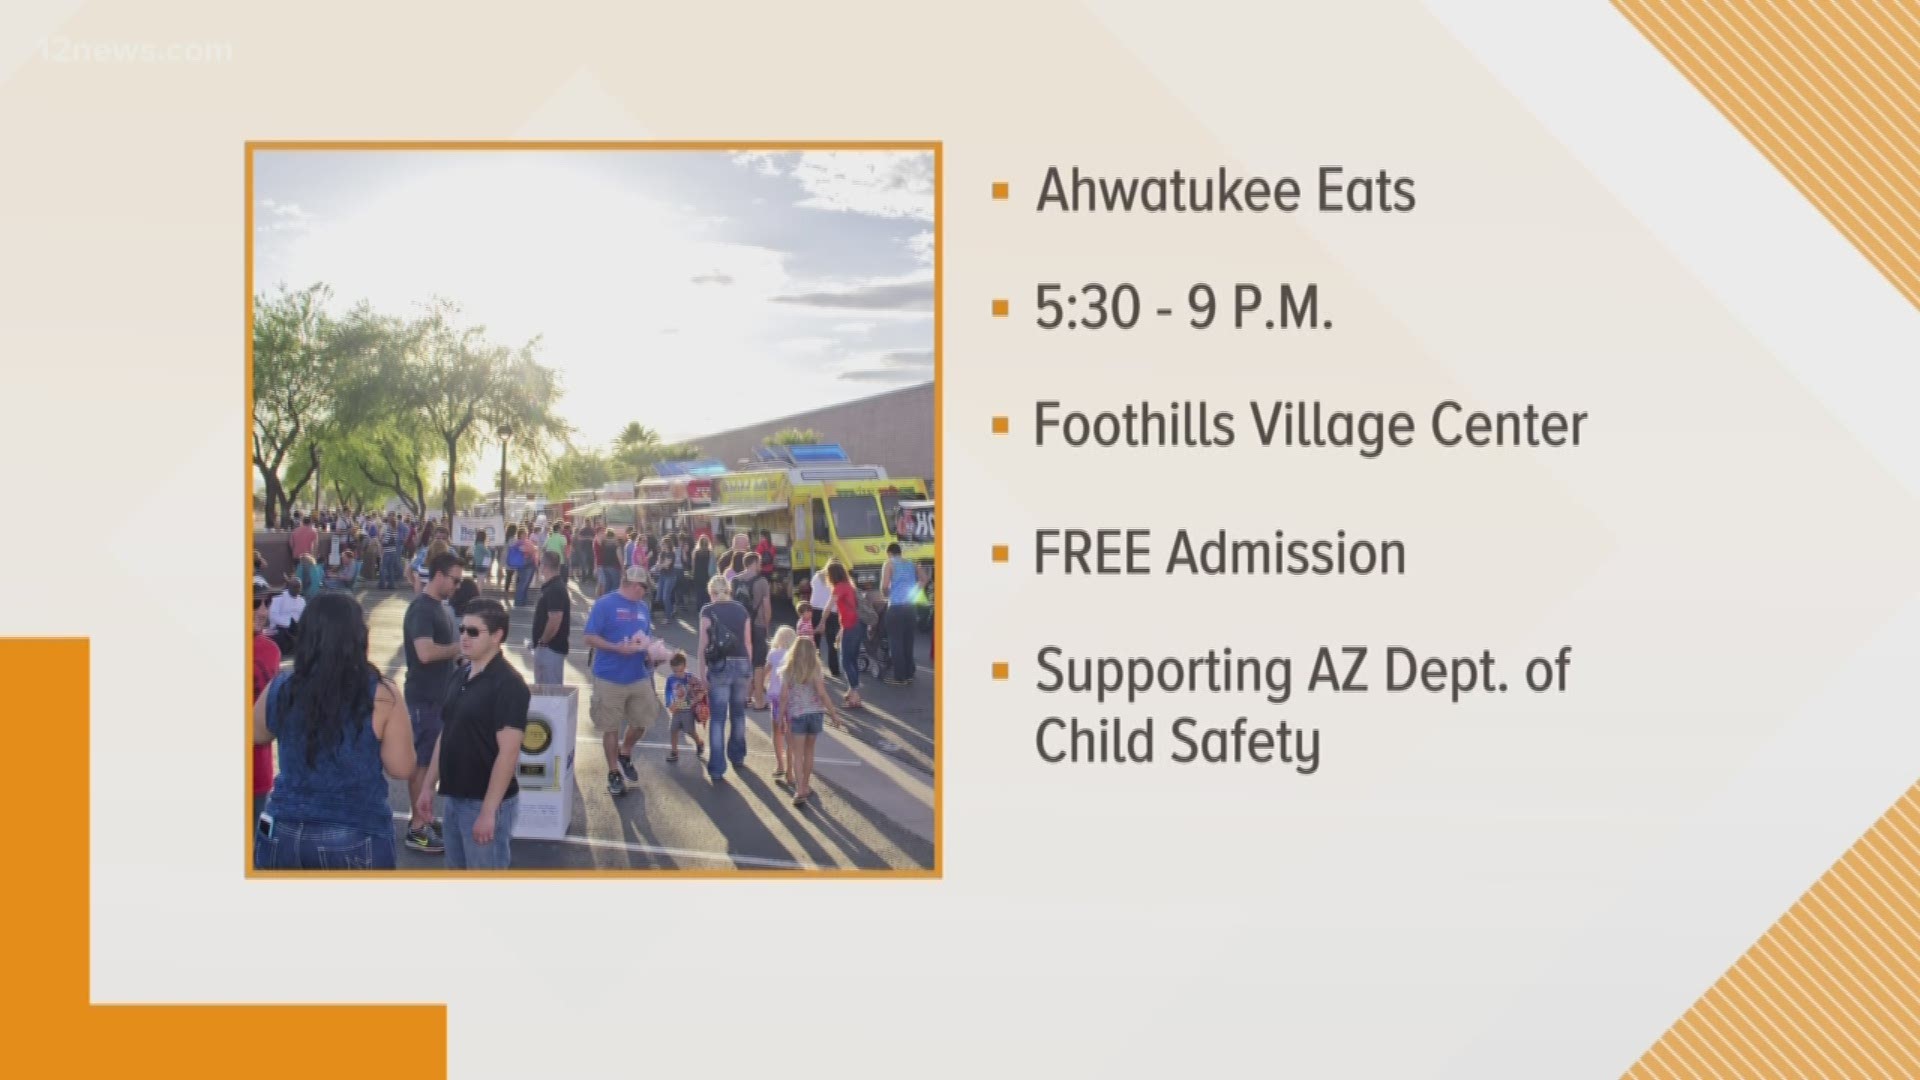 A night of mouth watering gourmet eats from 15 food trucks at Ahwatukee Foothills Village Center is giving back and has other family friendly fun for free.